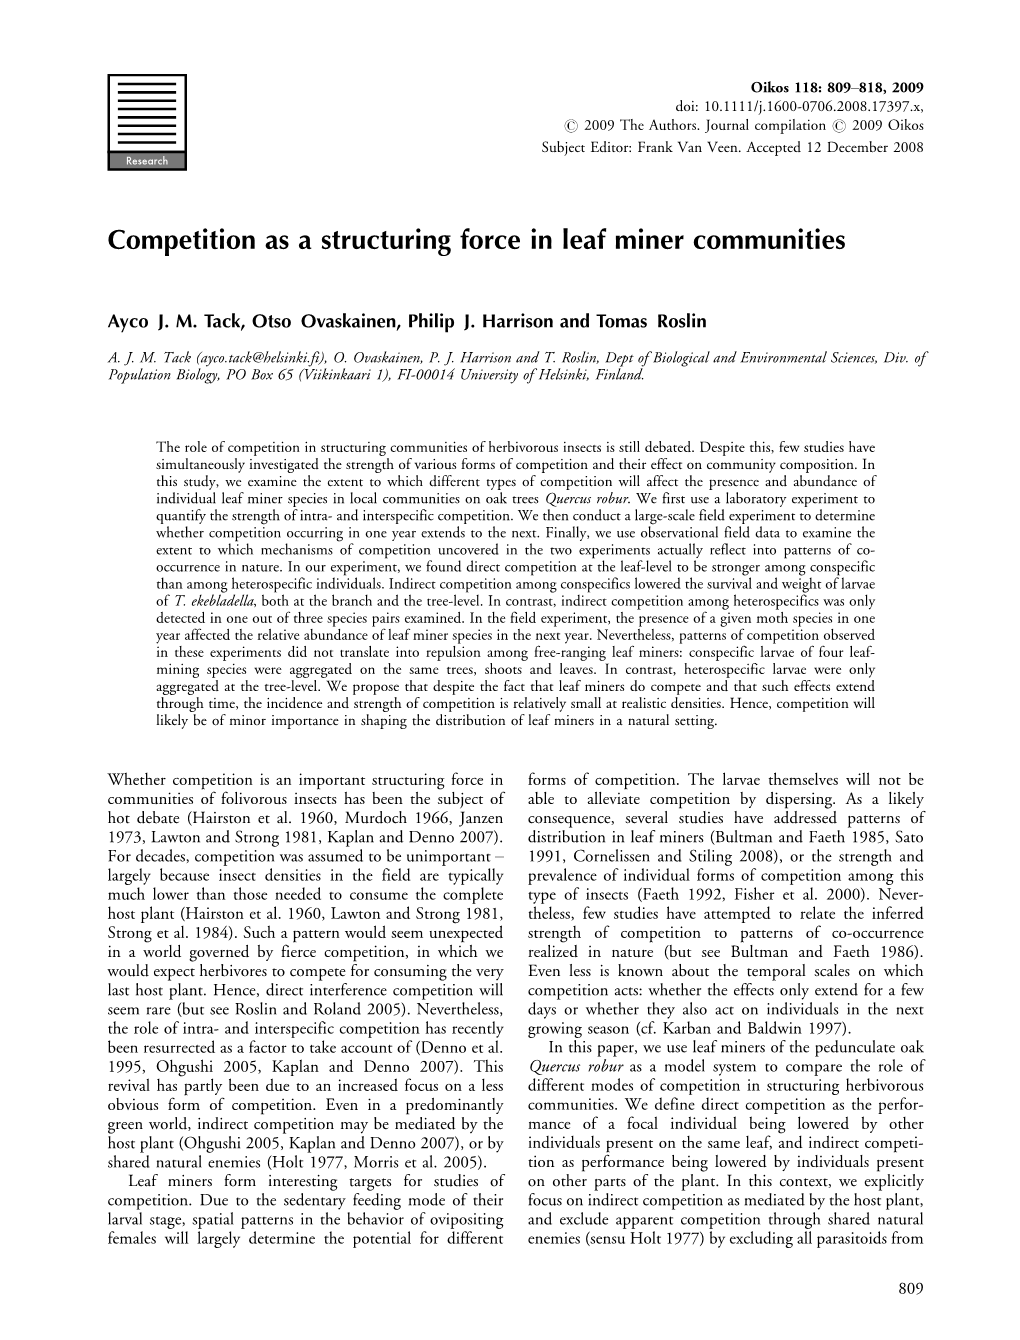 Competition As a Structuring Force in Leaf Miner Communities